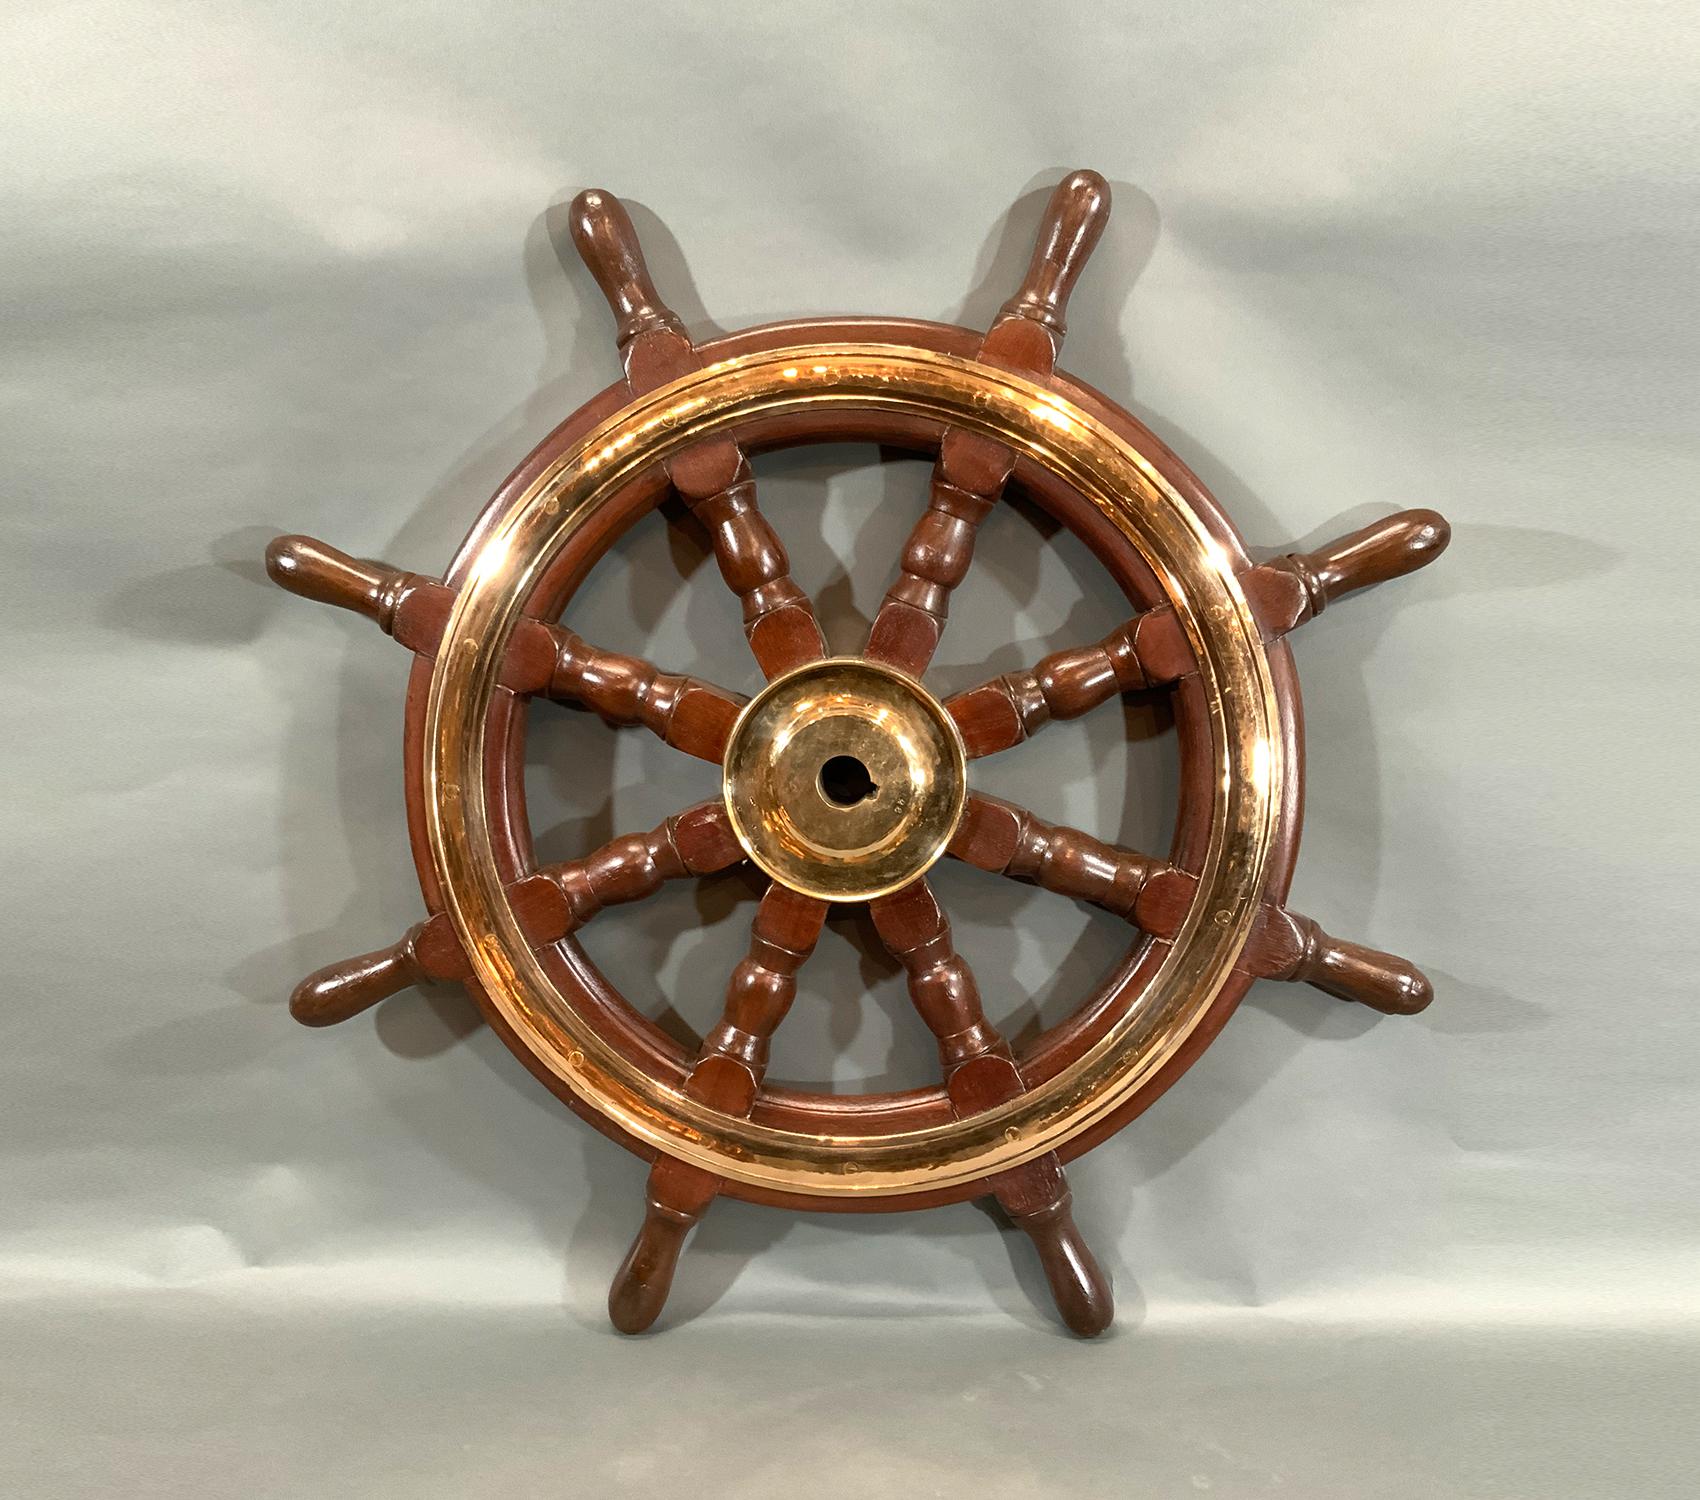 Eight spoke ships wheel with solid brass – Lannan Gallery with brass hub and trim ring. Eight turned posts are fitted to a heavy outer ring with thick inlaid brass band and hub. Varnished finish. 

Weight: 21 LBS
Overall Dimensions: 30